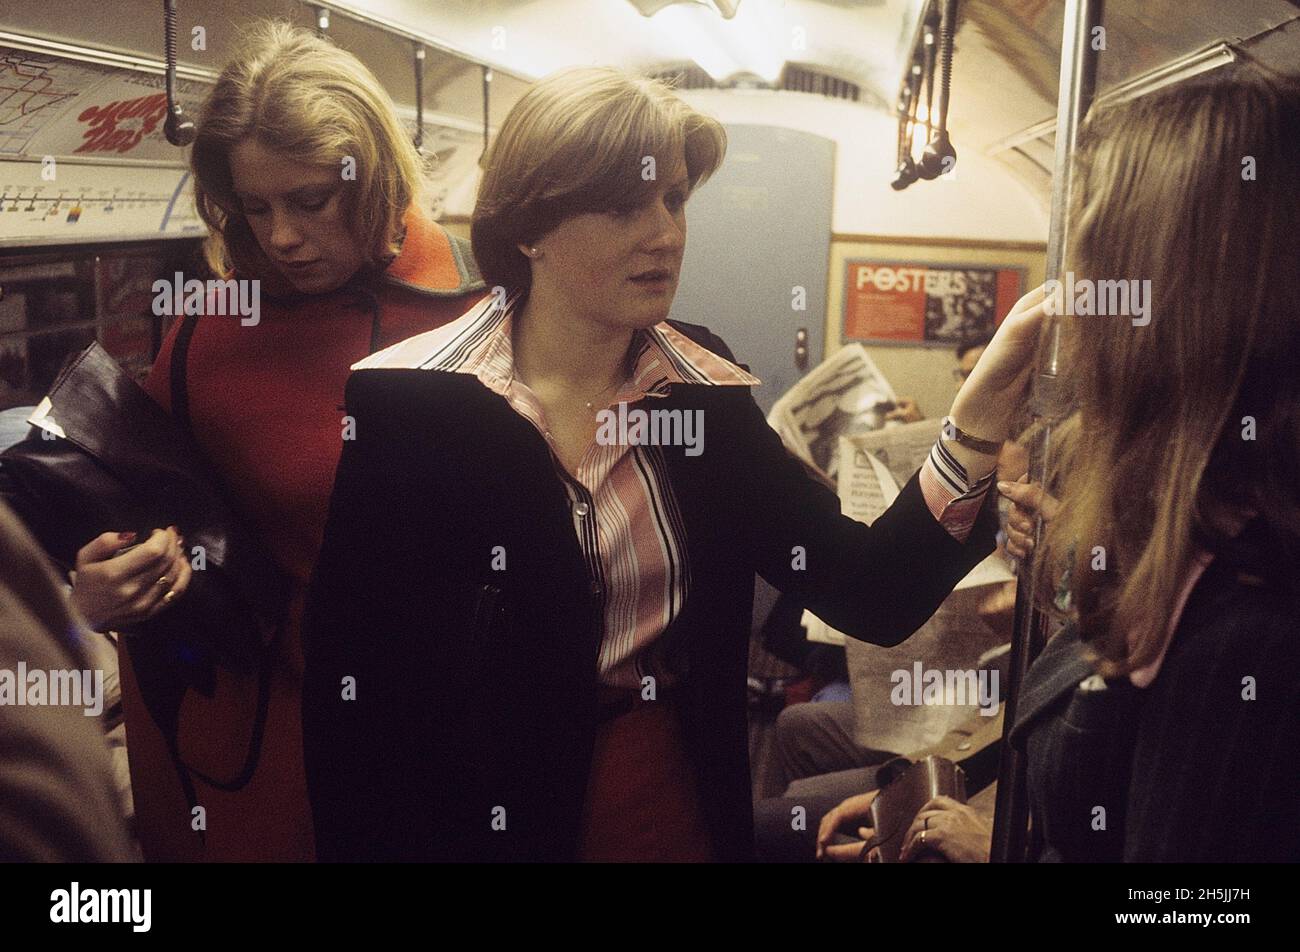 London 1982. Interior of a subwaytrain in London with people sitting and standing on the train. Credit Roland Palm. Stock Photo